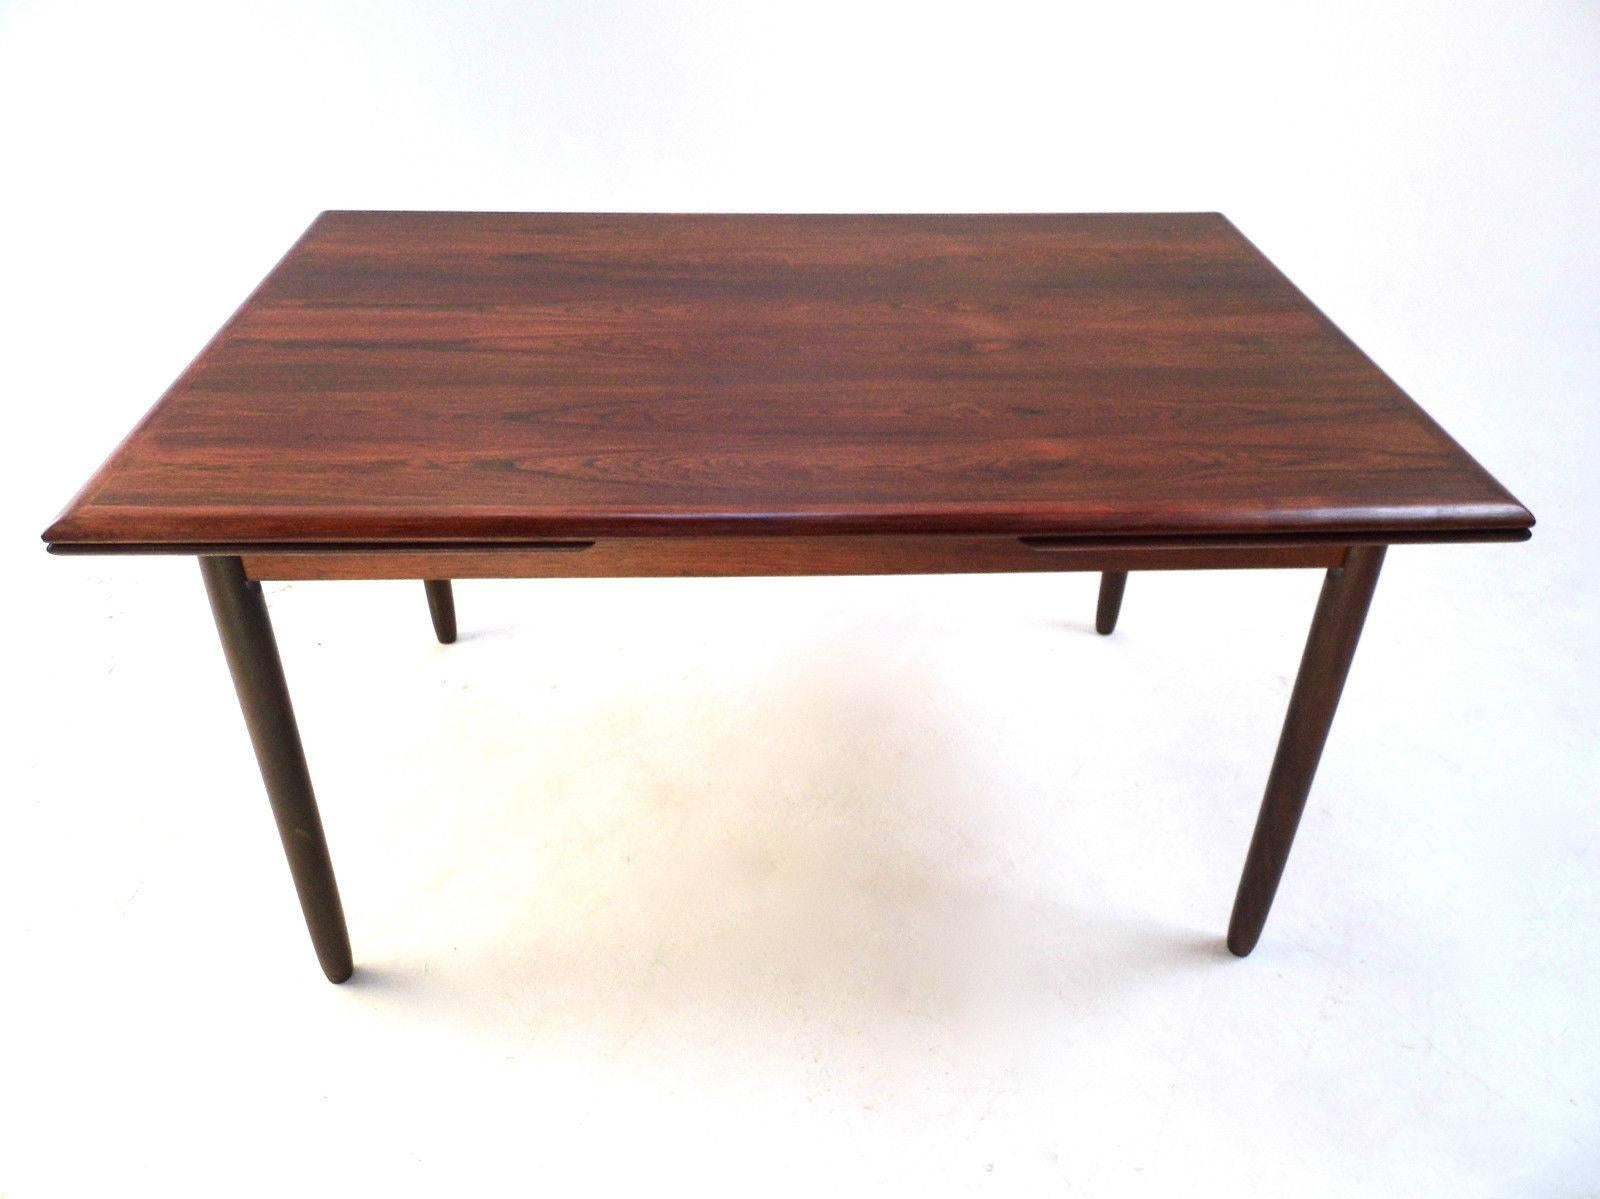 A beautiful Danish rosewood extending dining table, this would make a stylish addition to any dining area. The table has two extension panels which fit discreetly below the top panel and can be pulled out when needed. A striking piece of classically